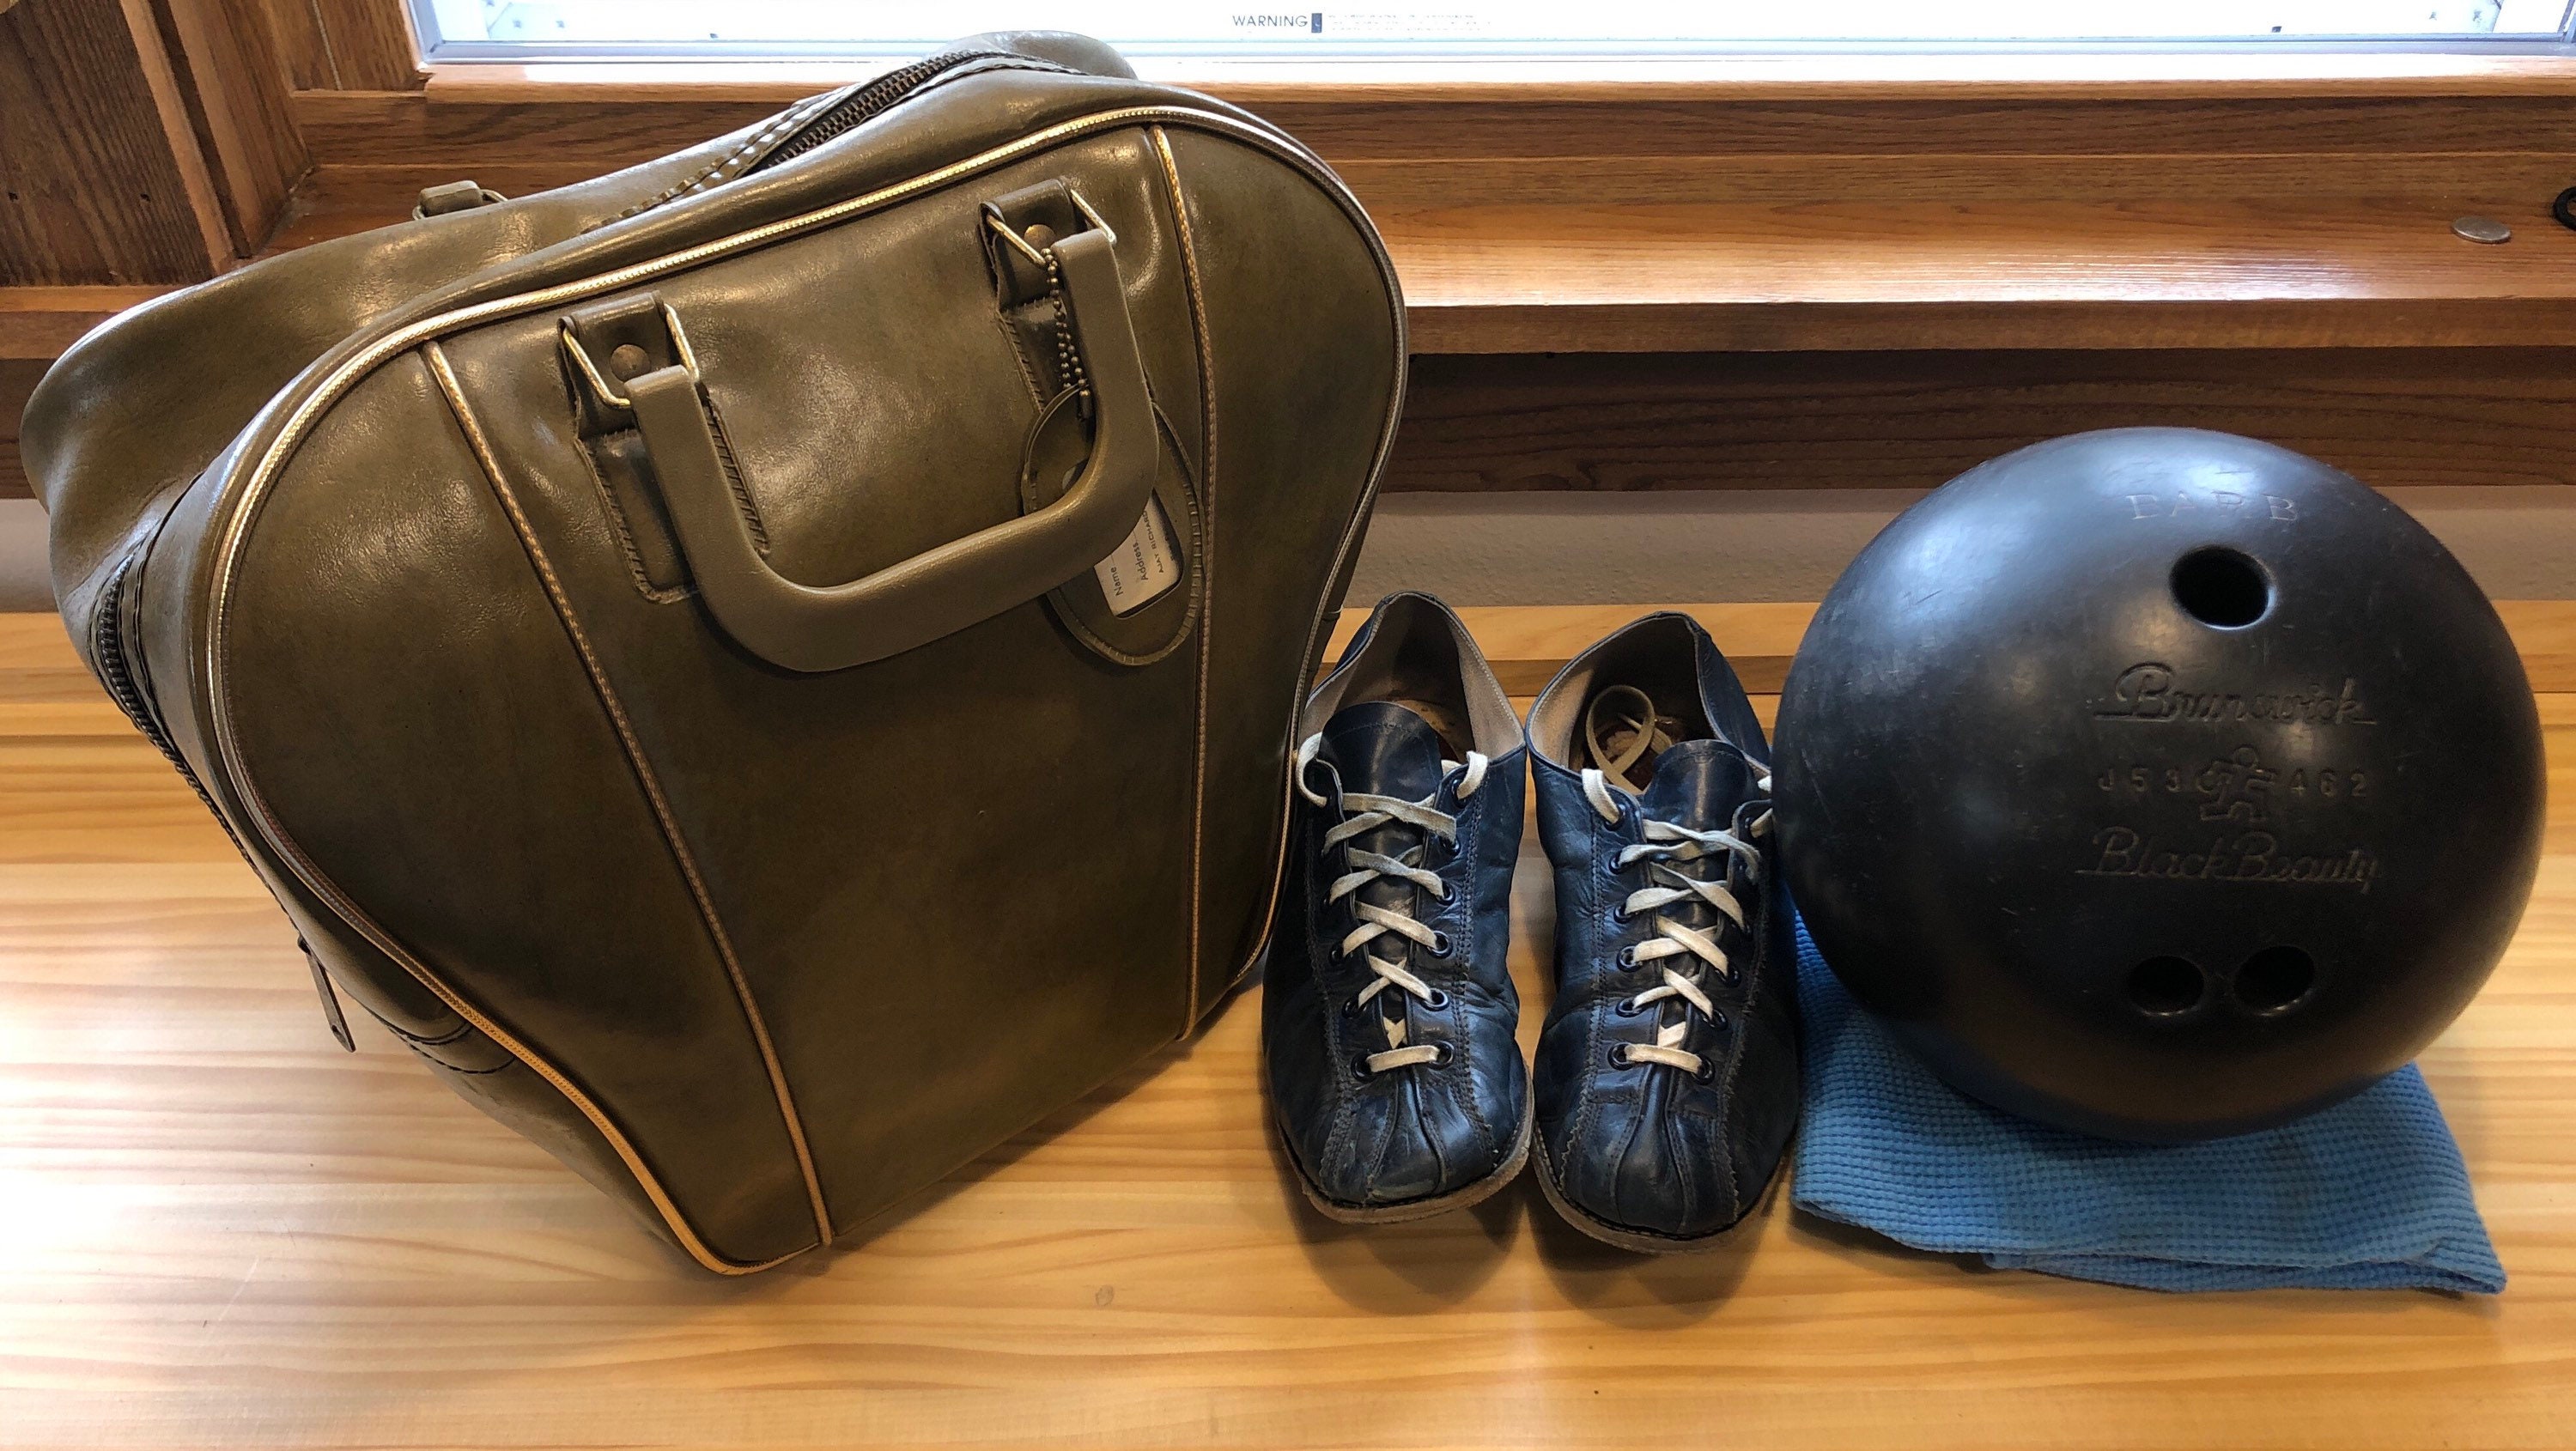 Vintage Bowling Ball Bag and Shoes Amflight AMF 